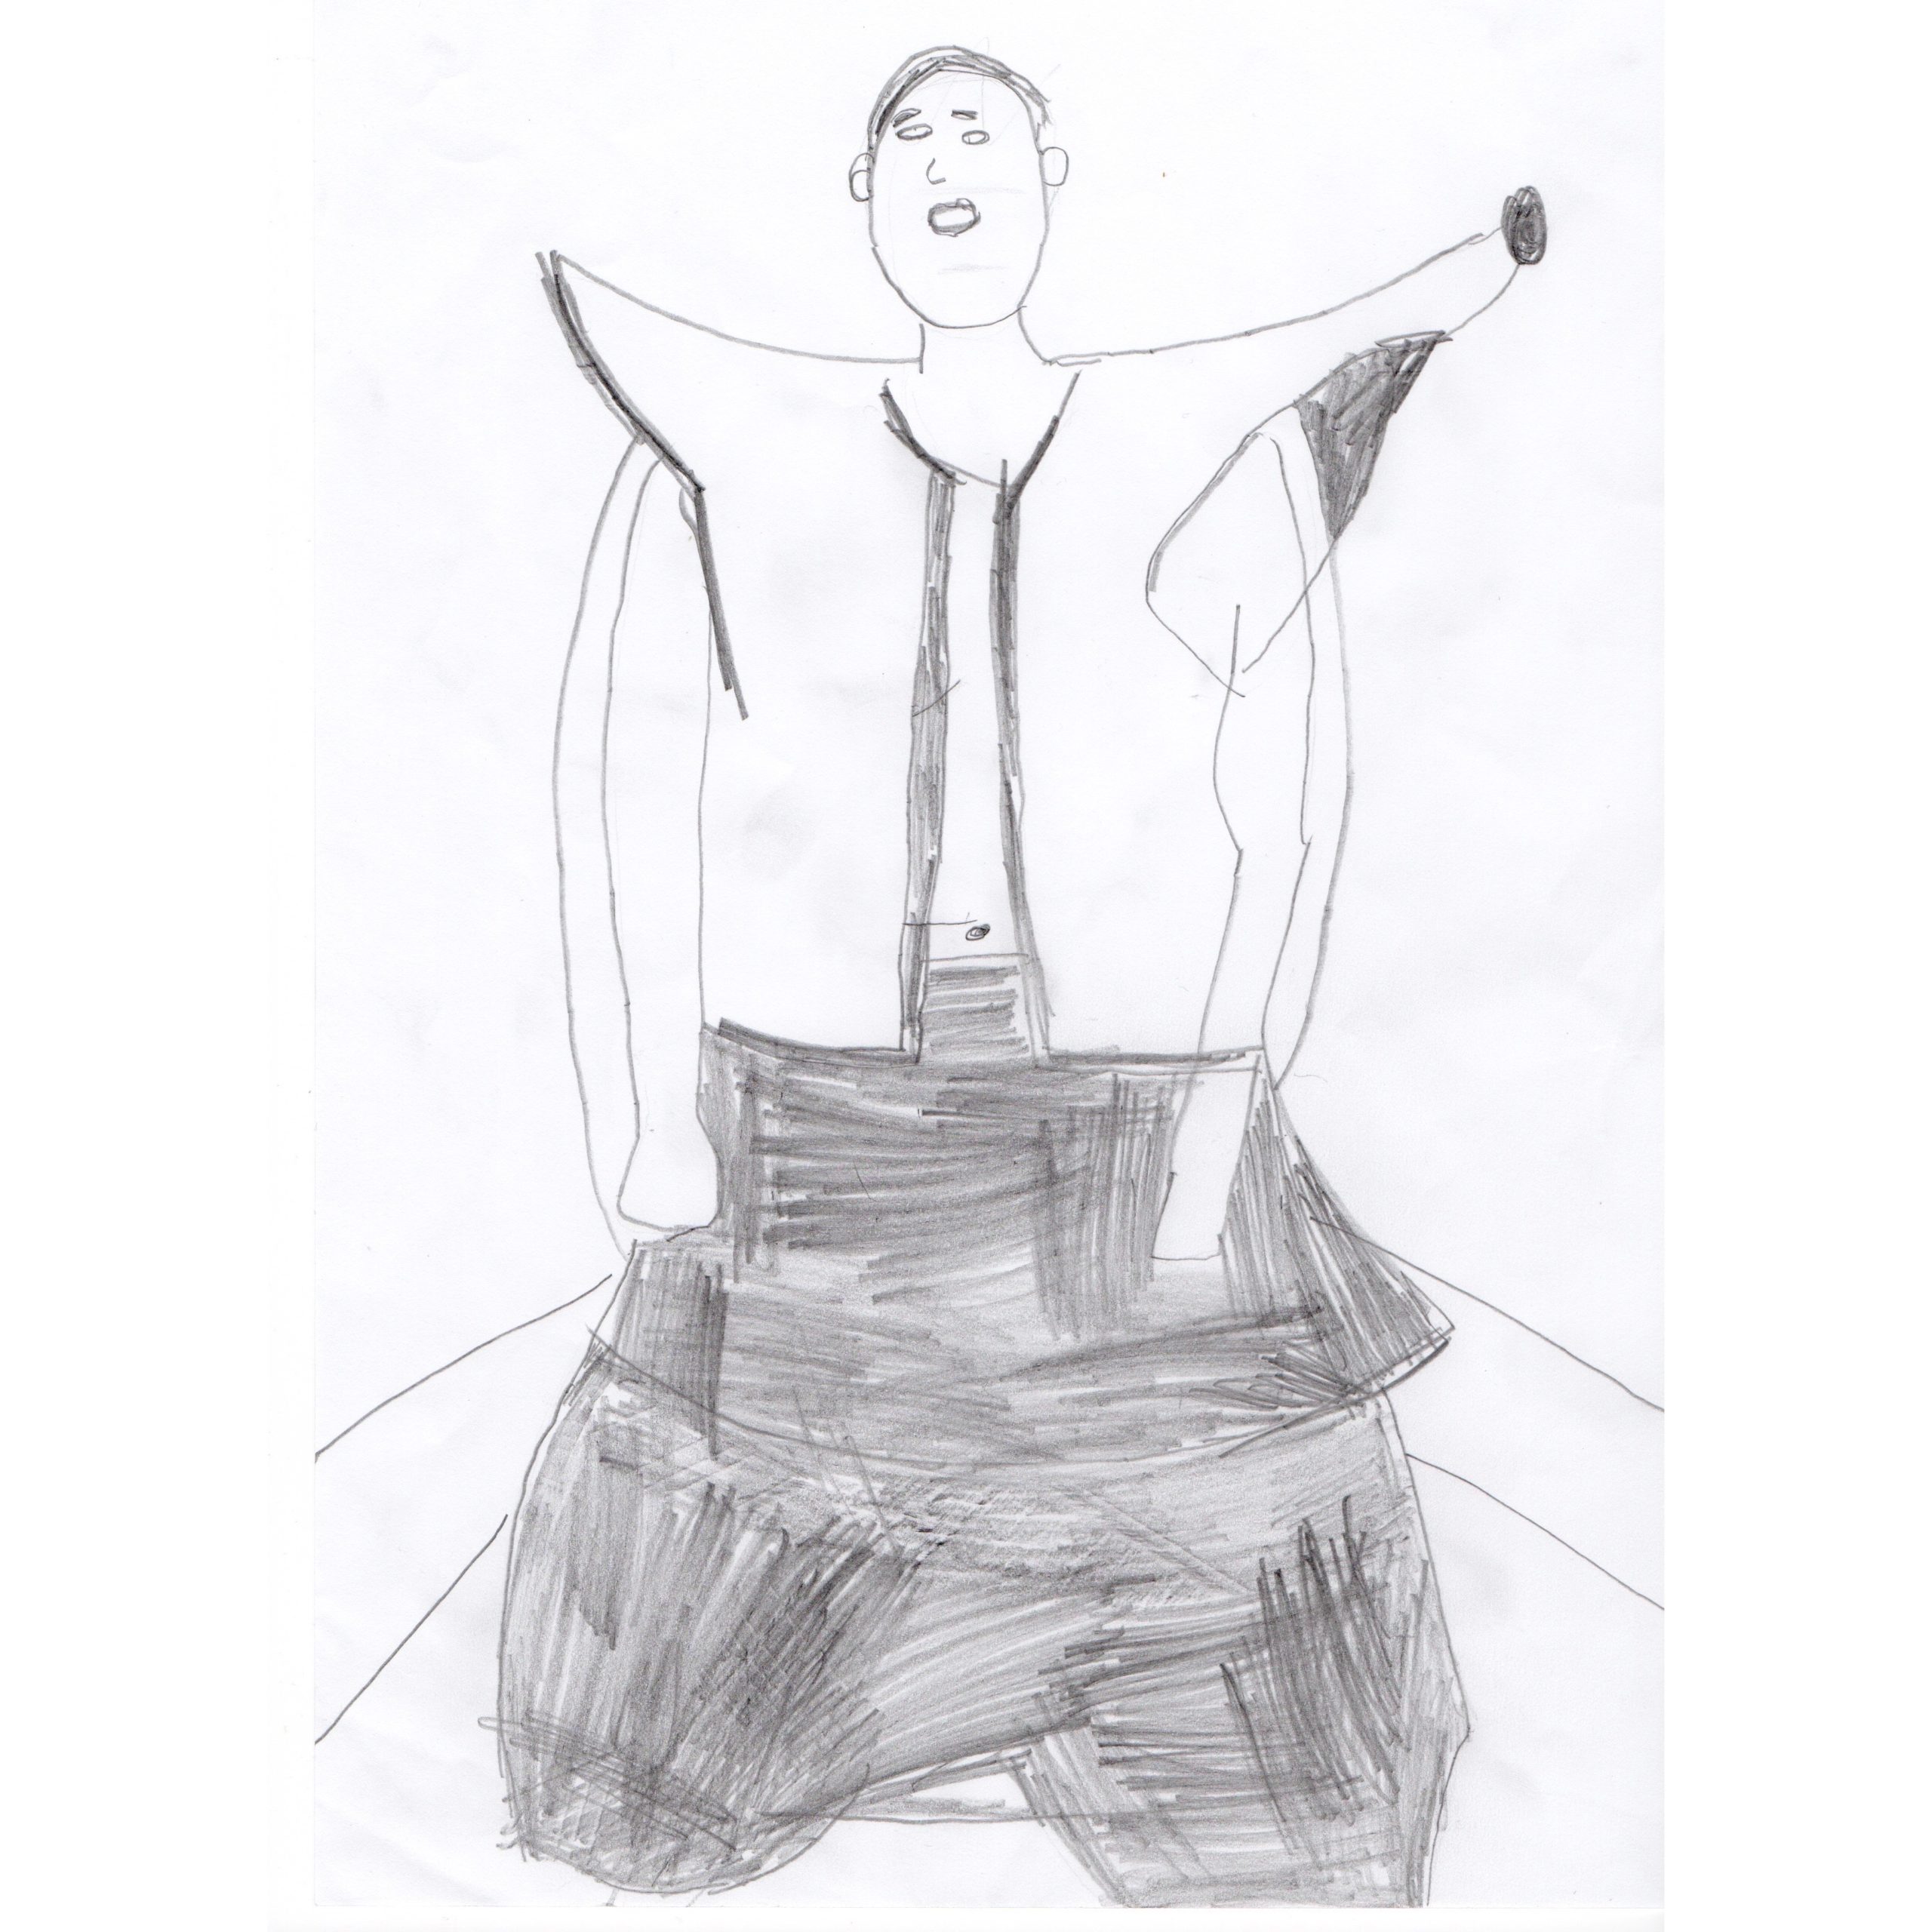 A drawing of a woman, her arms raised and outstretched, it looks as though the drawing has been executed in pencil